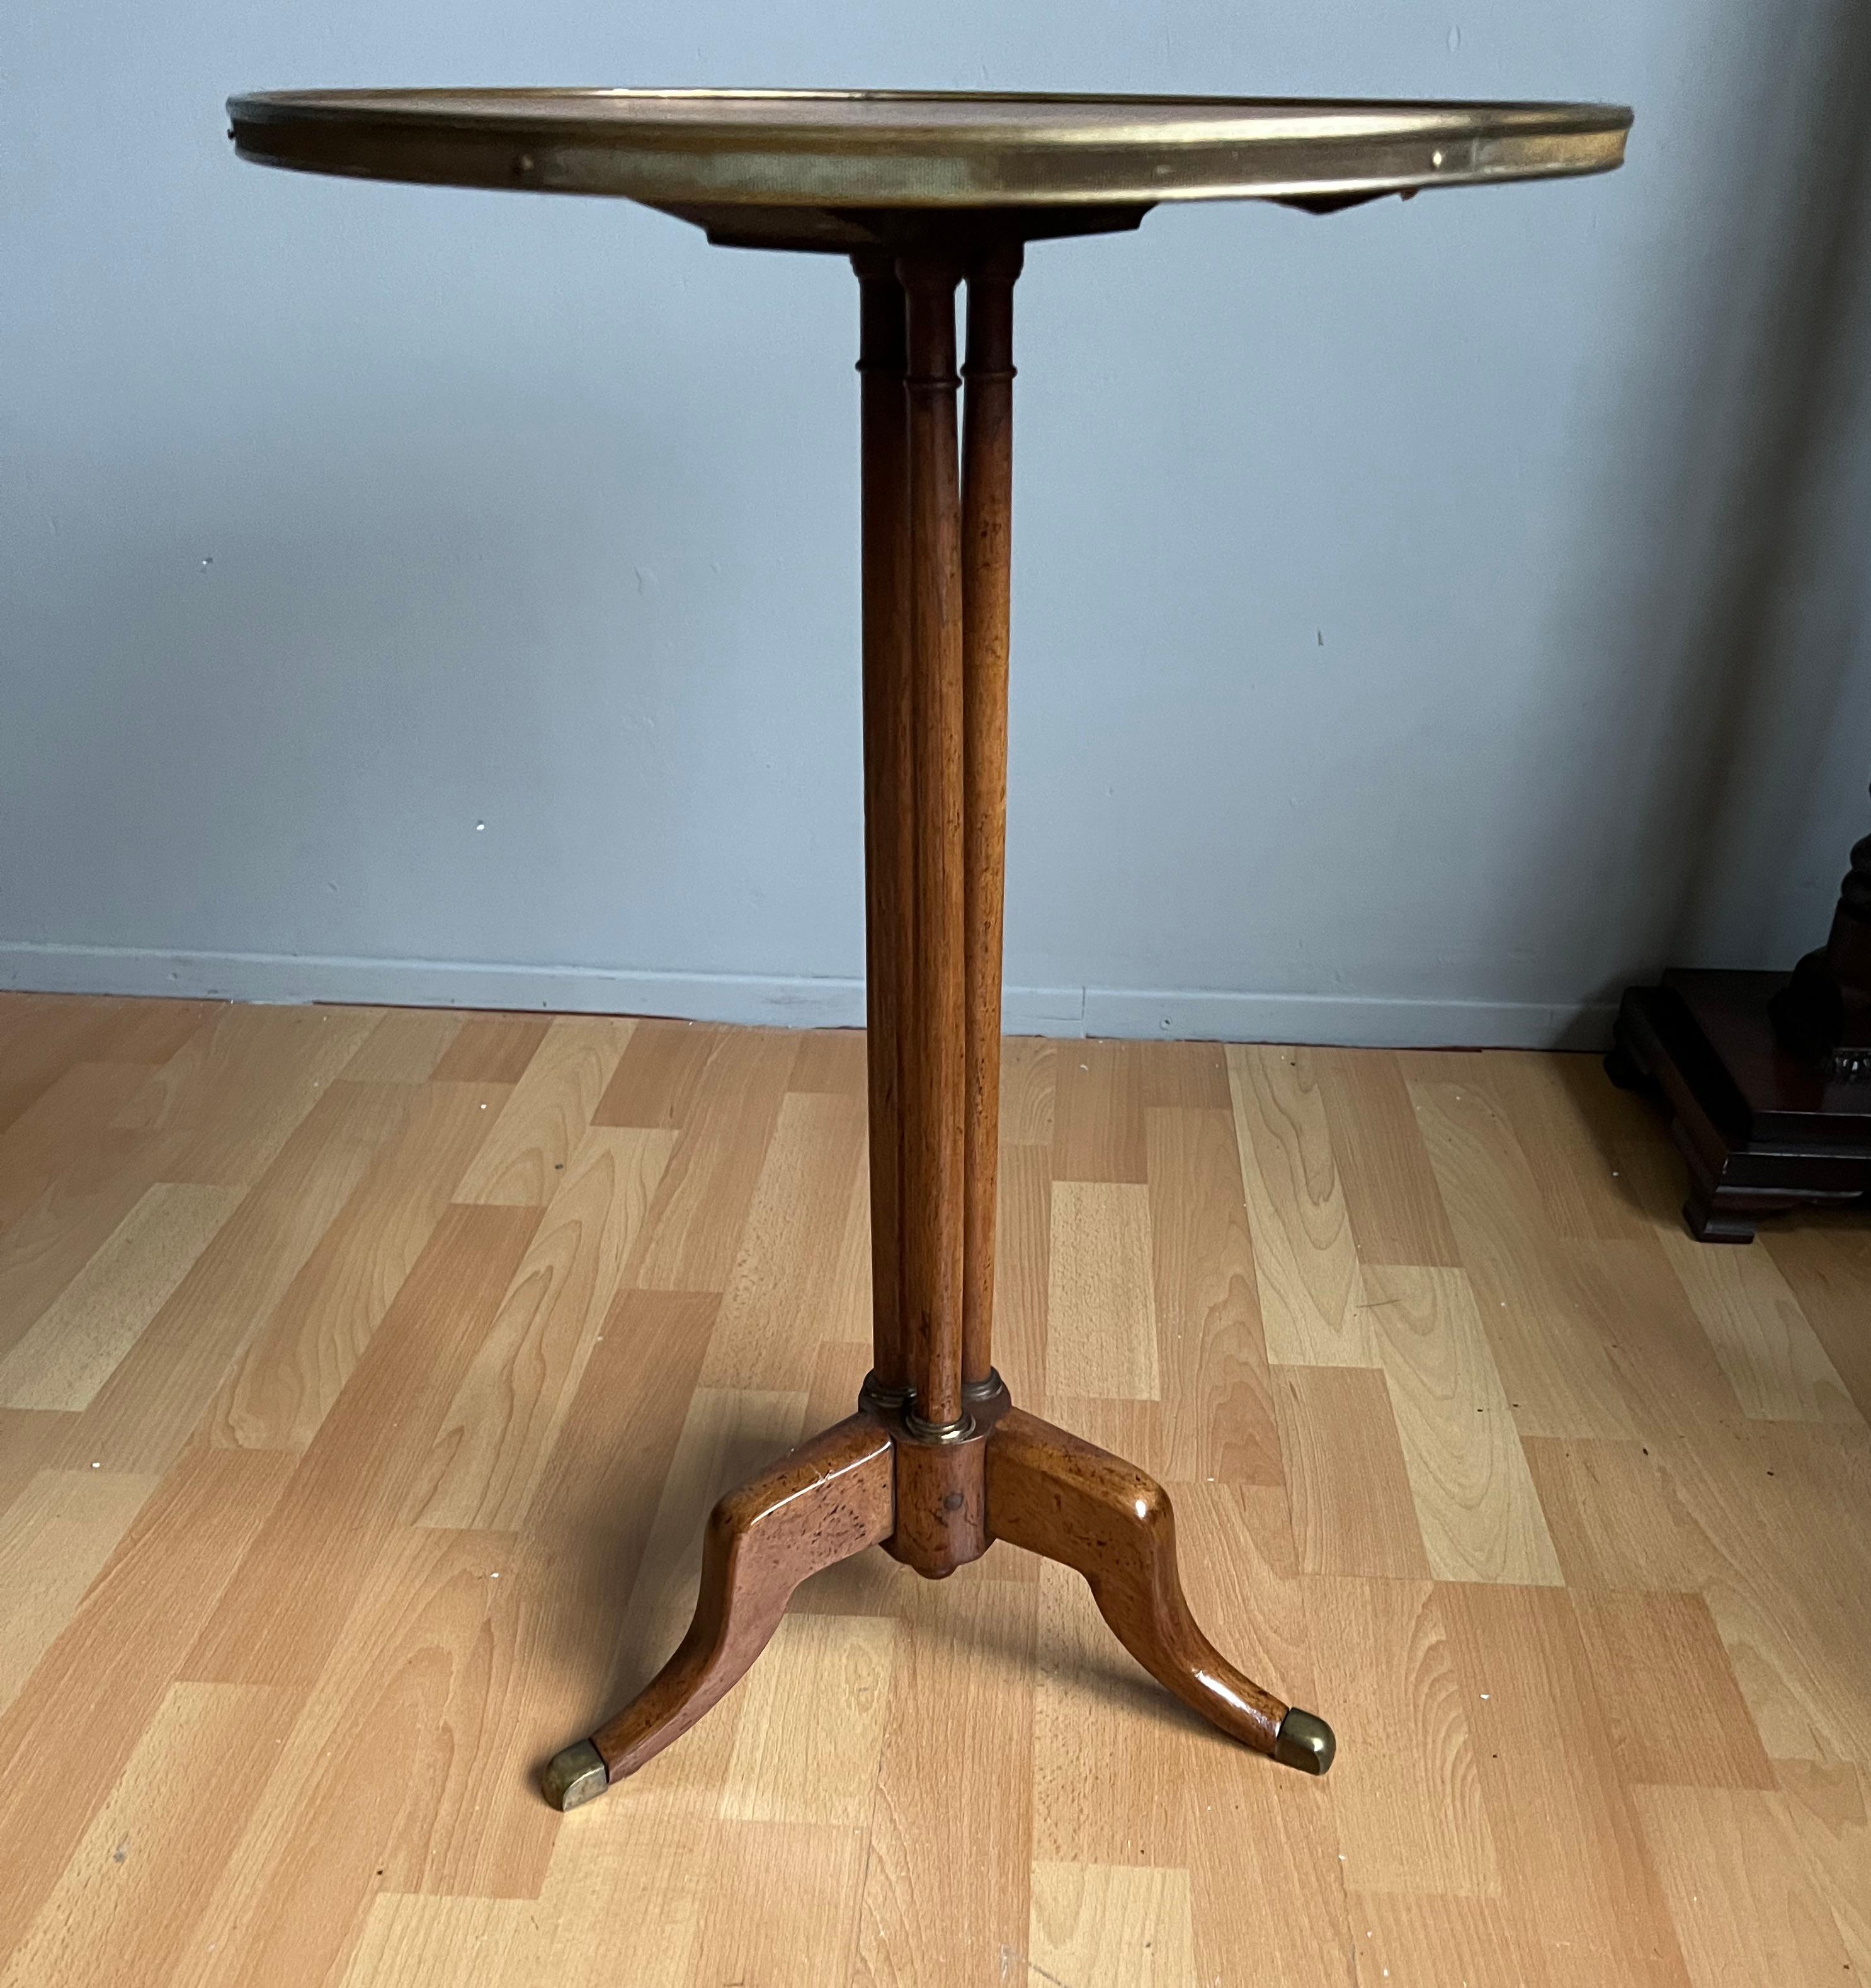 Wonderful early 20th century French craftsmanship end or side table.

Finding the most beautiful and rarest antiques in the best possible condition is what we dream of and we have been very fortunate to have had many dreams come true. When you look